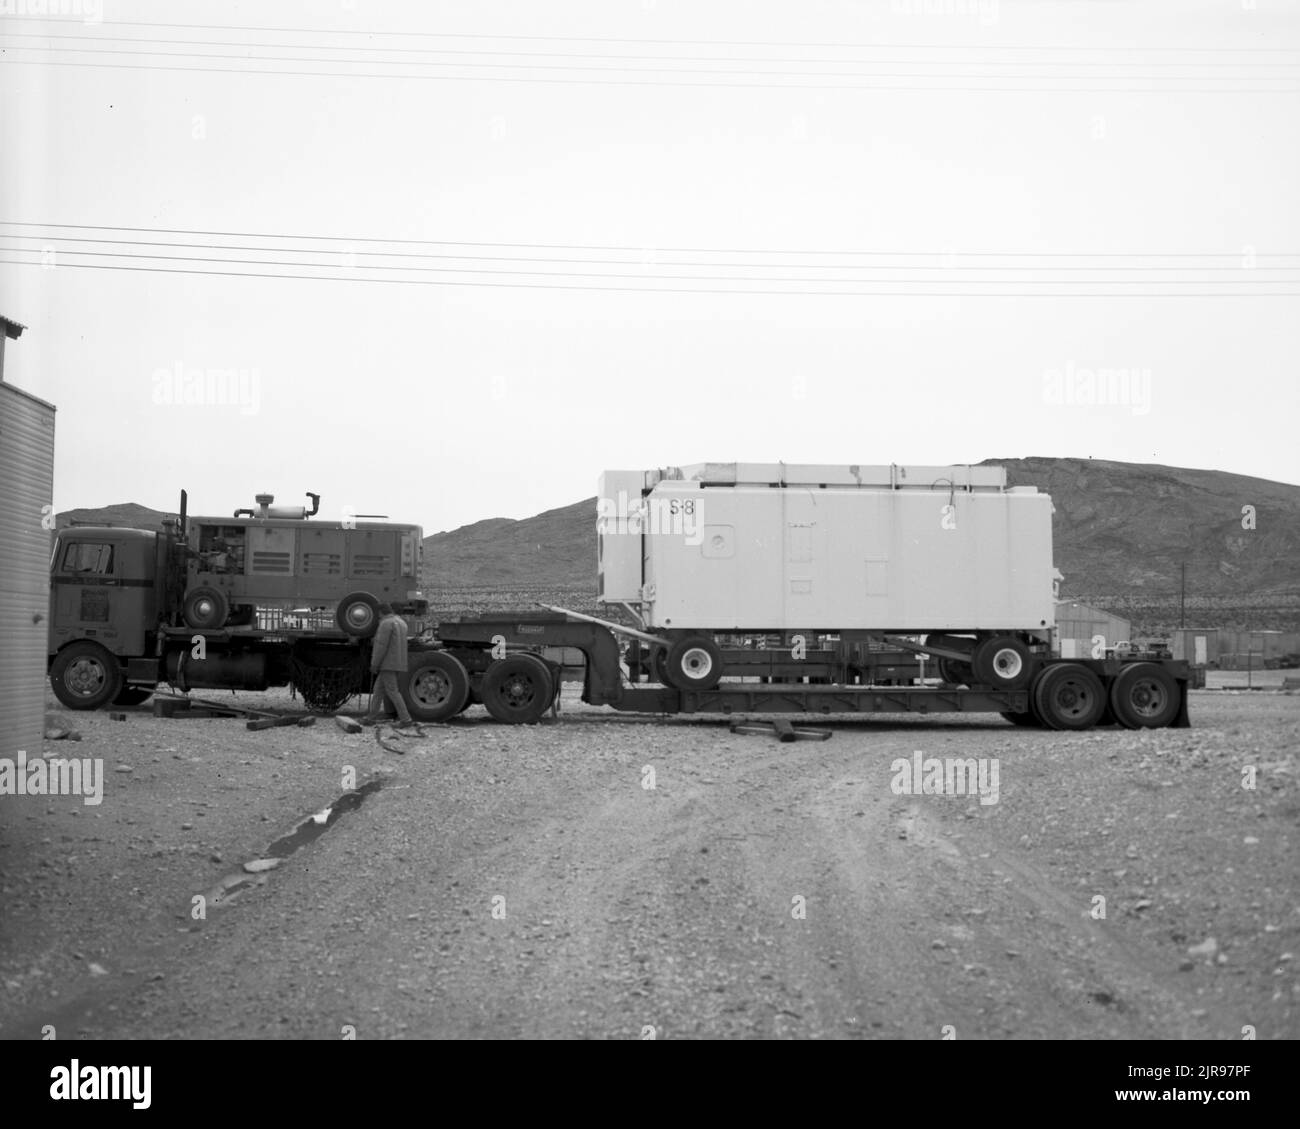 B722002 AREA 23 LOADING OF THE TRAILER BROUILLARD (Project Engineer) NOV 7, 72 EG&G/NTS PHOTO LAB Publication Date: 11/7/1972  EDGERTON, GERMESHAUSEN & GRIER; EG&G; LOADING; NEVADA; NEVADA TEST SITE; NTS; NUCLEAR ENERGY TECHNOLOGY; NUCLEAR EXPLOSIONS; NUCLEAR TESTING; NUCLEAR TESTS; TEST SITES; TRAILERS; TRUCKS; UGT; UNDERGROUND TESTING; LOADING OF THE TRAILER  historical images. 1972 - 2012. Department of Energy. National Nuclear Security Administration. Photographs Related to Nuclear Weapons Testing at the Nevada Test Site. Stock Photo